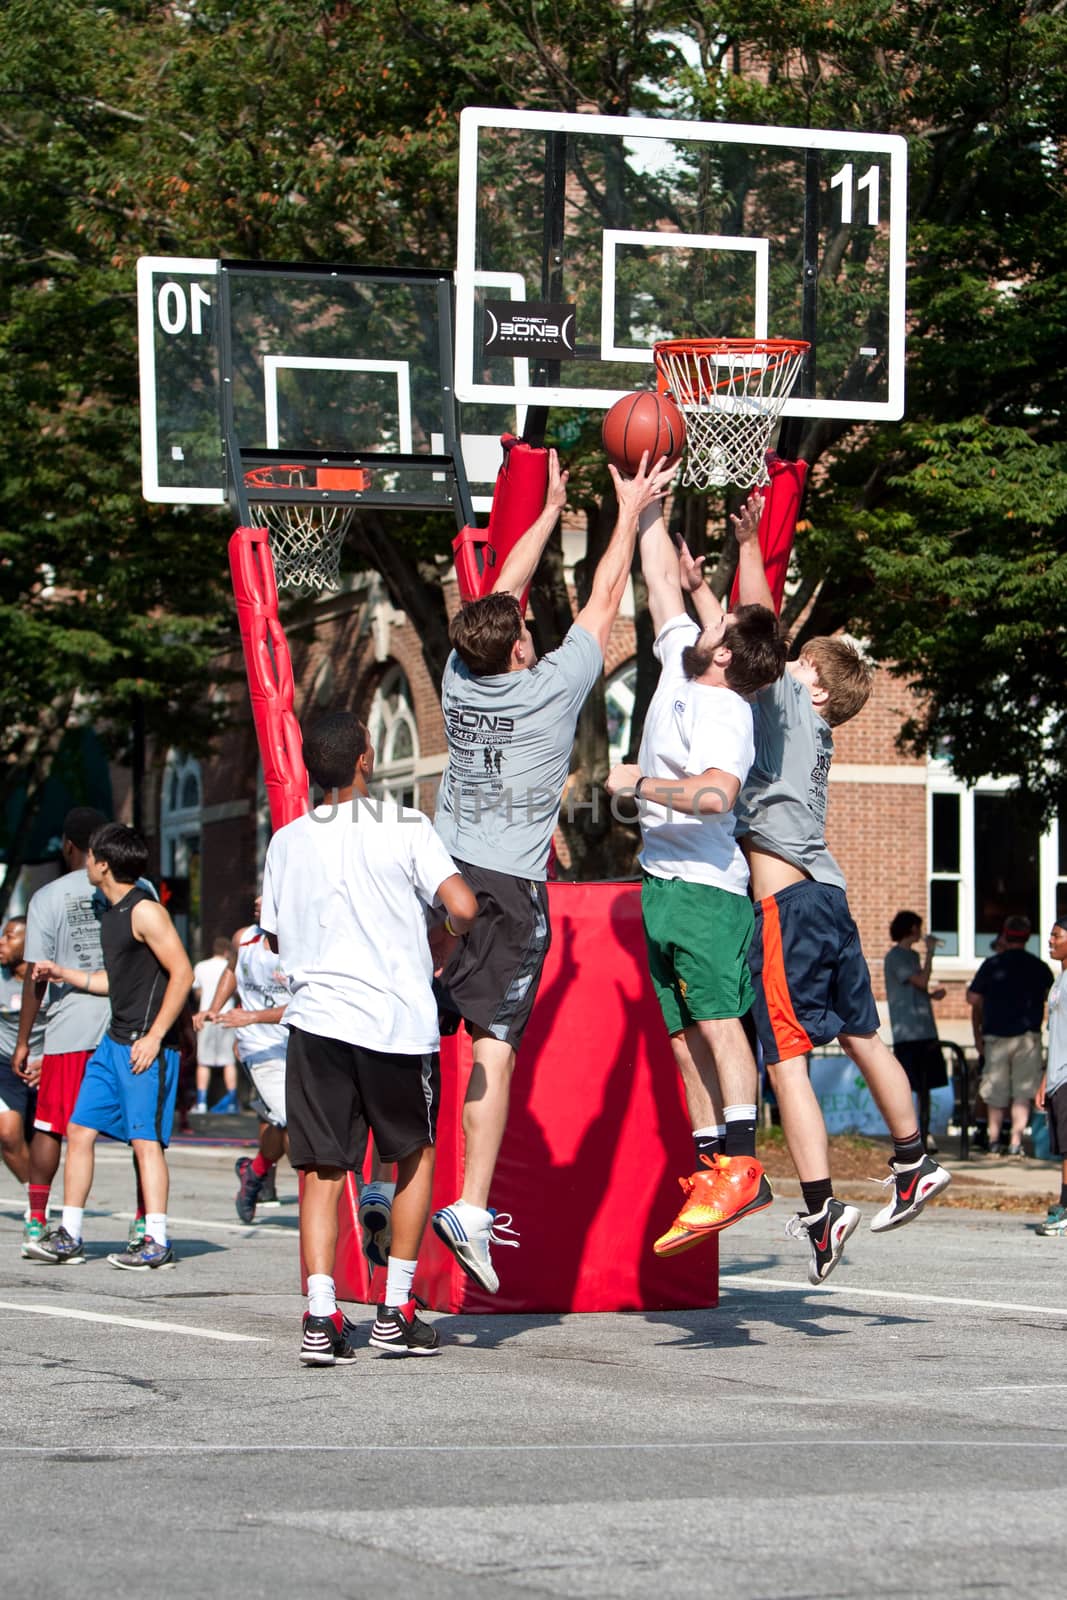 Men Jump While Fighting For Ball In Street Basketball Tournament by BluIz60